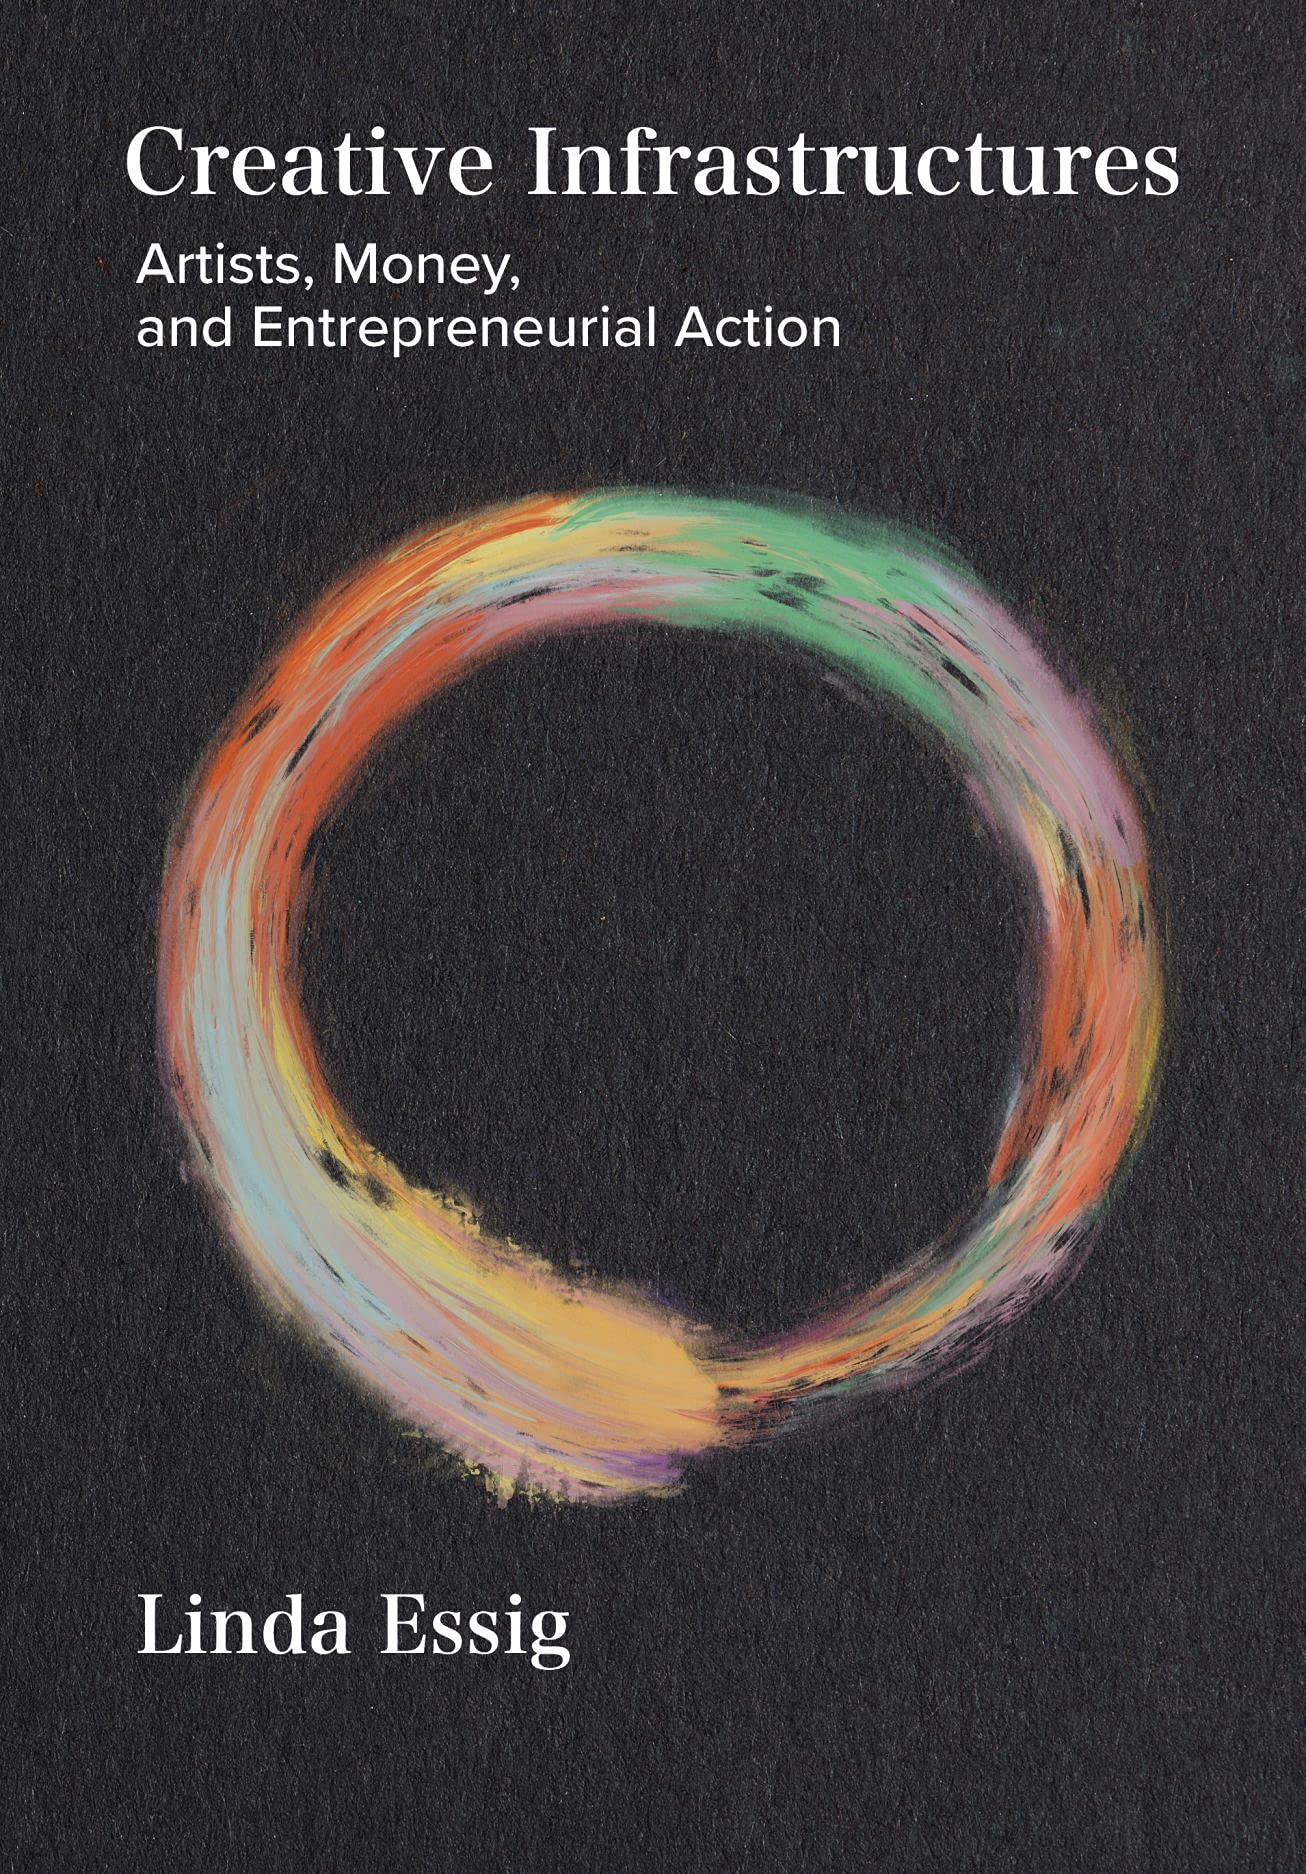 Cover image for Creative Infrastructures: Artists, Money, and Entrepreneurial Action by Linda Essig. Image is a multicolored painted circle on a textured black backround. Book text is in black.